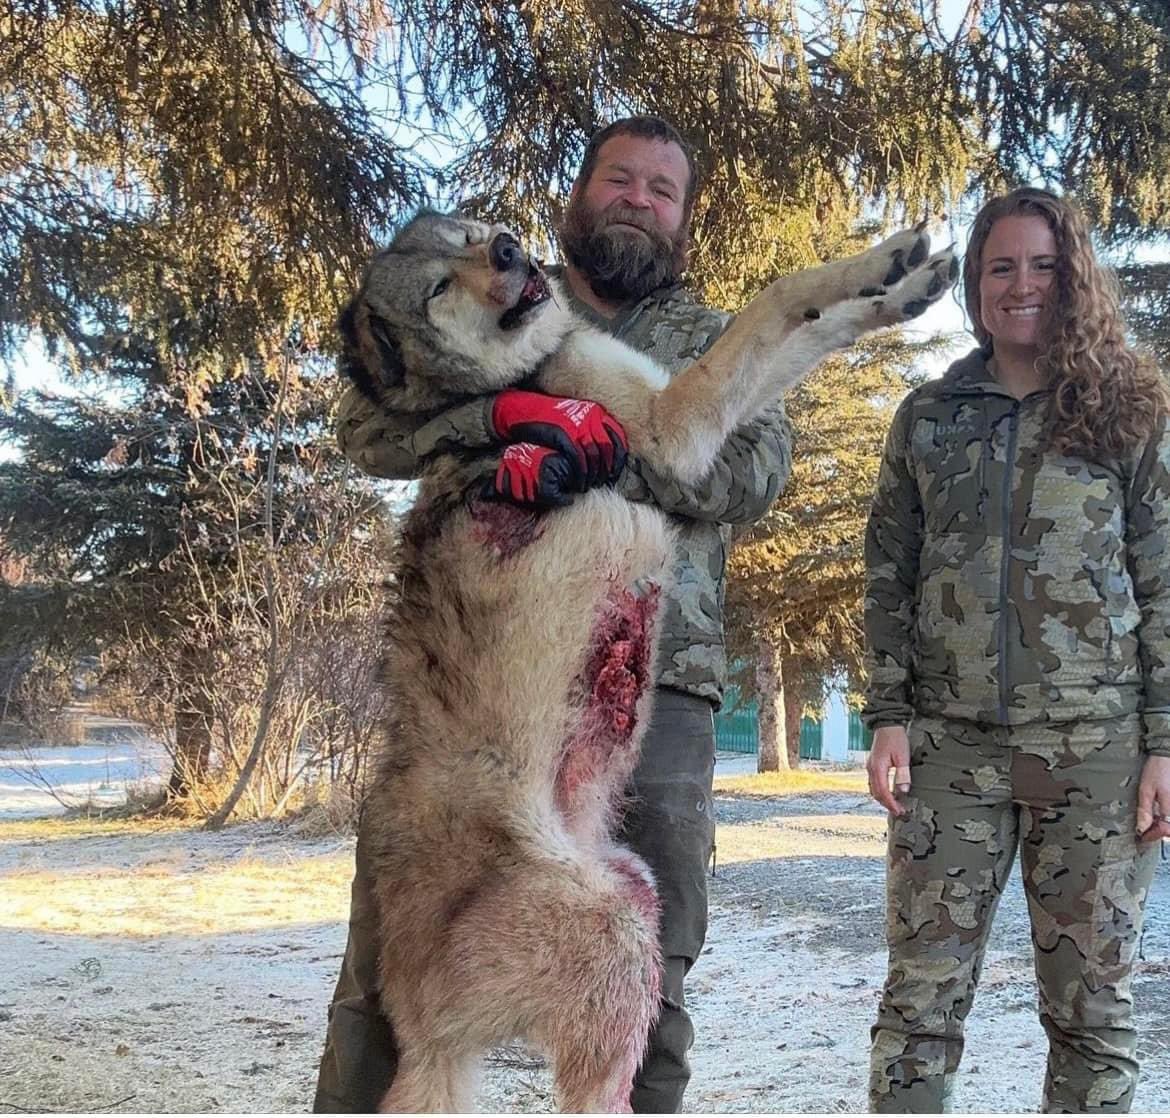 Tana & Adam Grenda runs Stuck N The Rut. Tana couldn't keep the delight out of her voice when this wolf went down. 'You shot a freakin wolf.' Must be a real turn on for her. 🤬RT #BanTrophyHunting @SARA2001NOOR @Angelux1111 @Gail7175 @DidiFrench @Lin11W @PeterEgan6